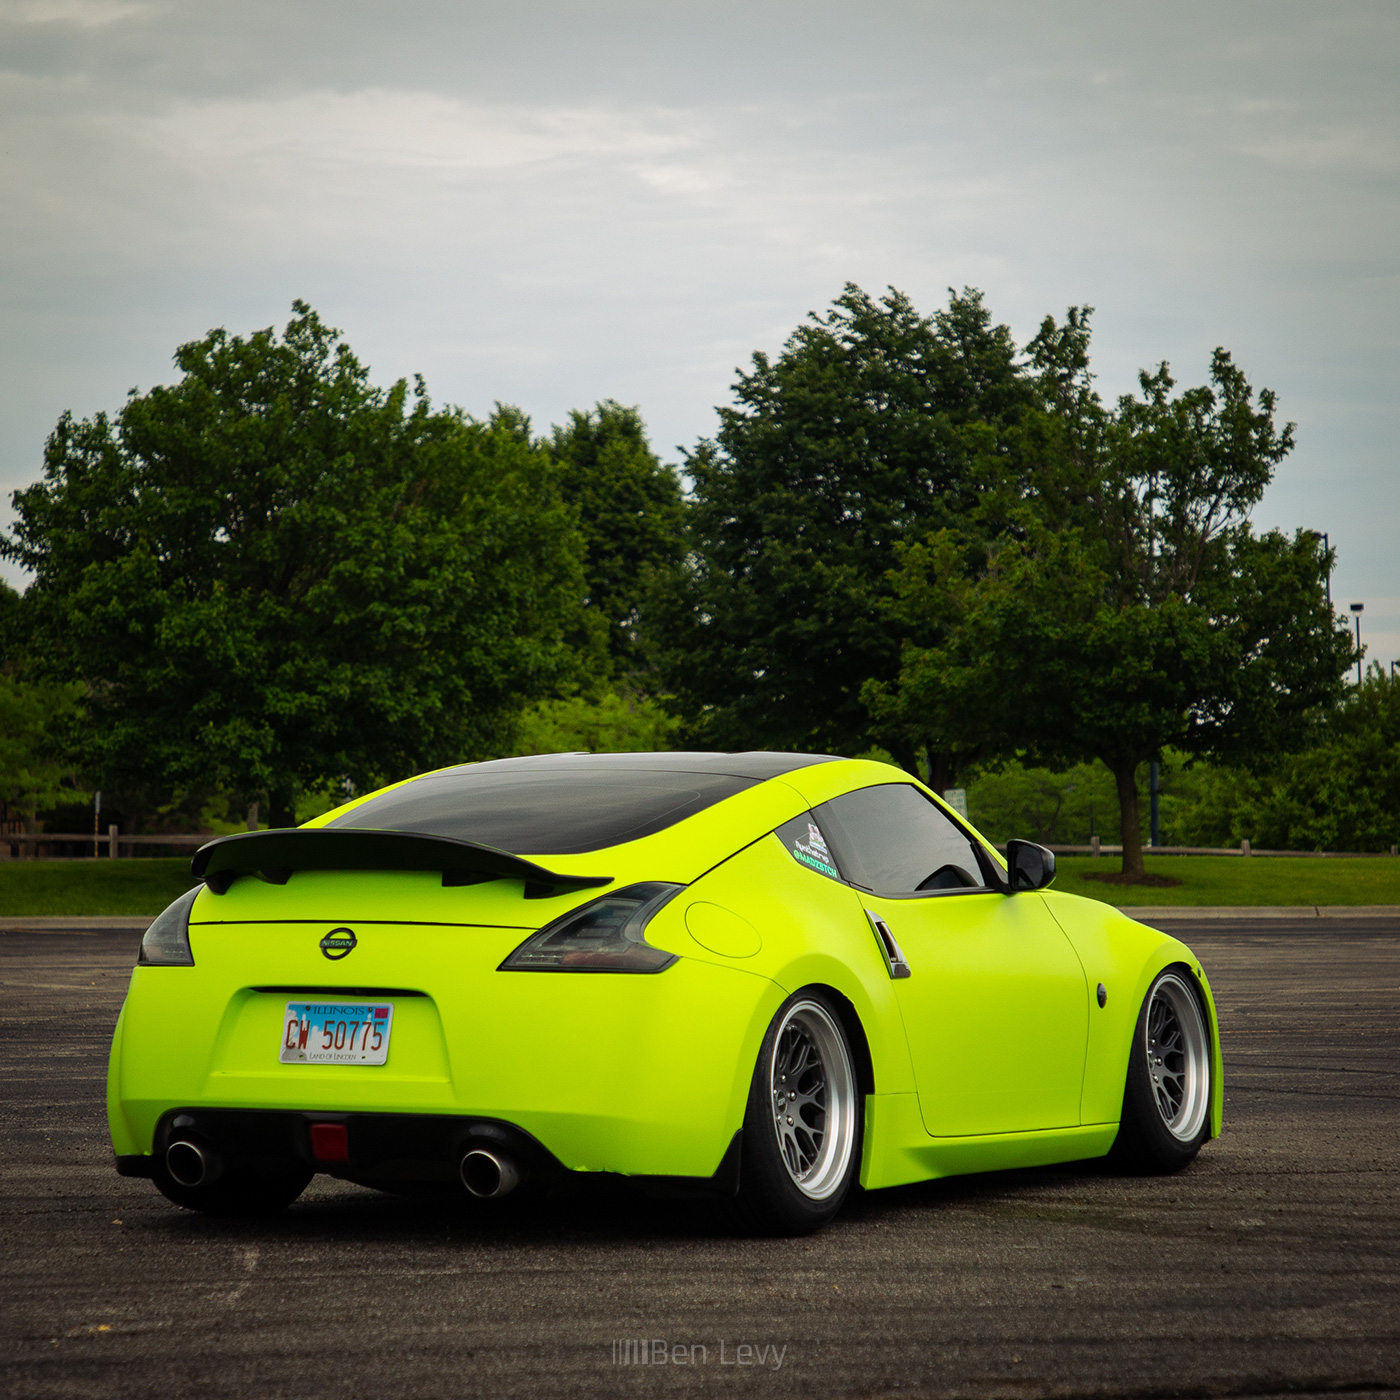 Bright Green Wrap on 370Z at Cars and Culture Show